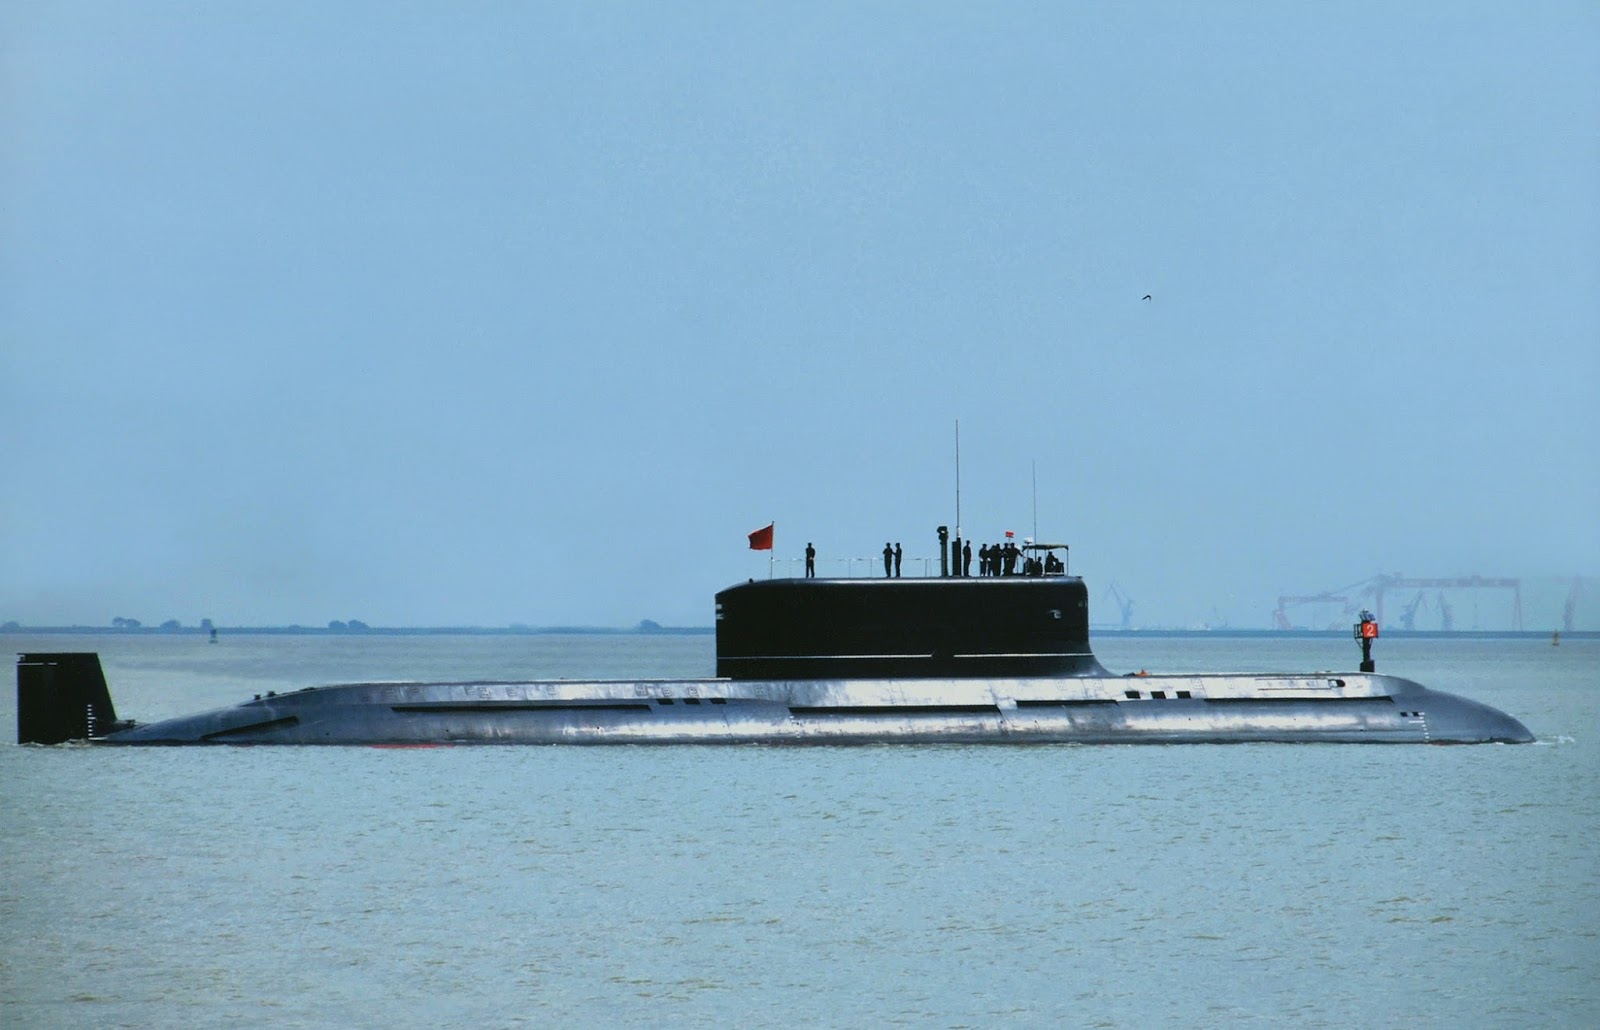 Chinese Type 032 QING Class Diesel-Electric Ballistic Missile Submarine pla navy export pakistan ballistic missile cruise missile antiship (5).jpg